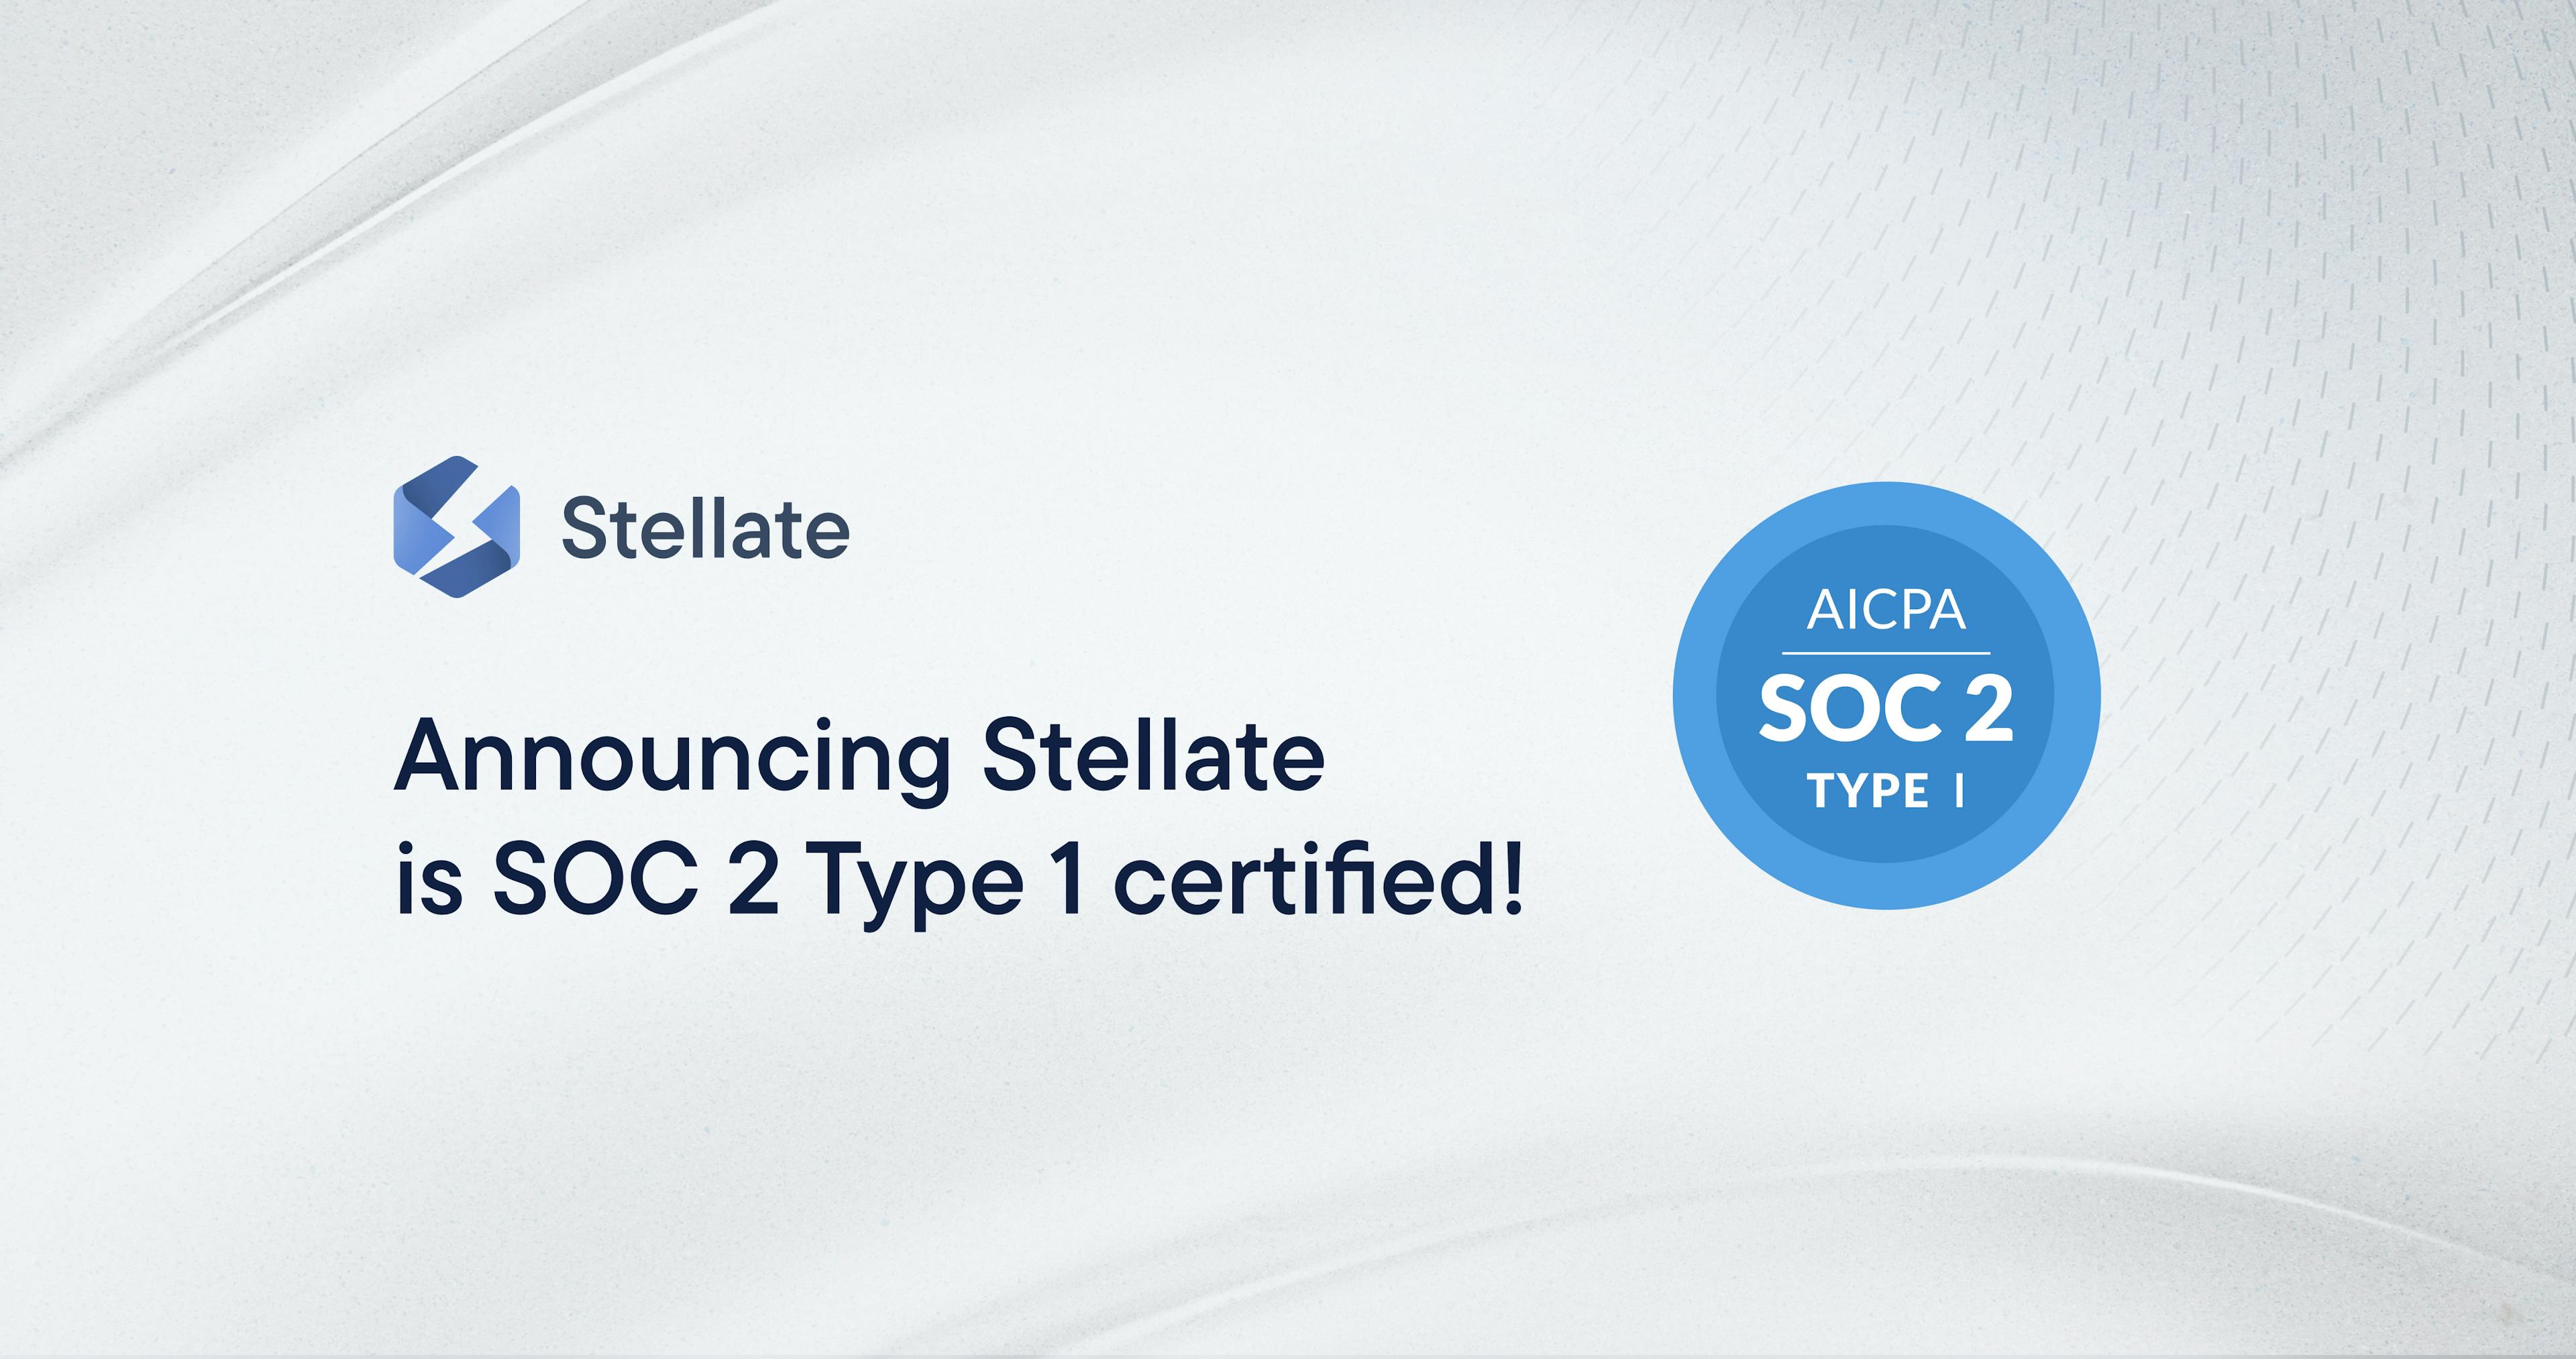 Announcing Stellate is SOC 2 Type 1 certified!